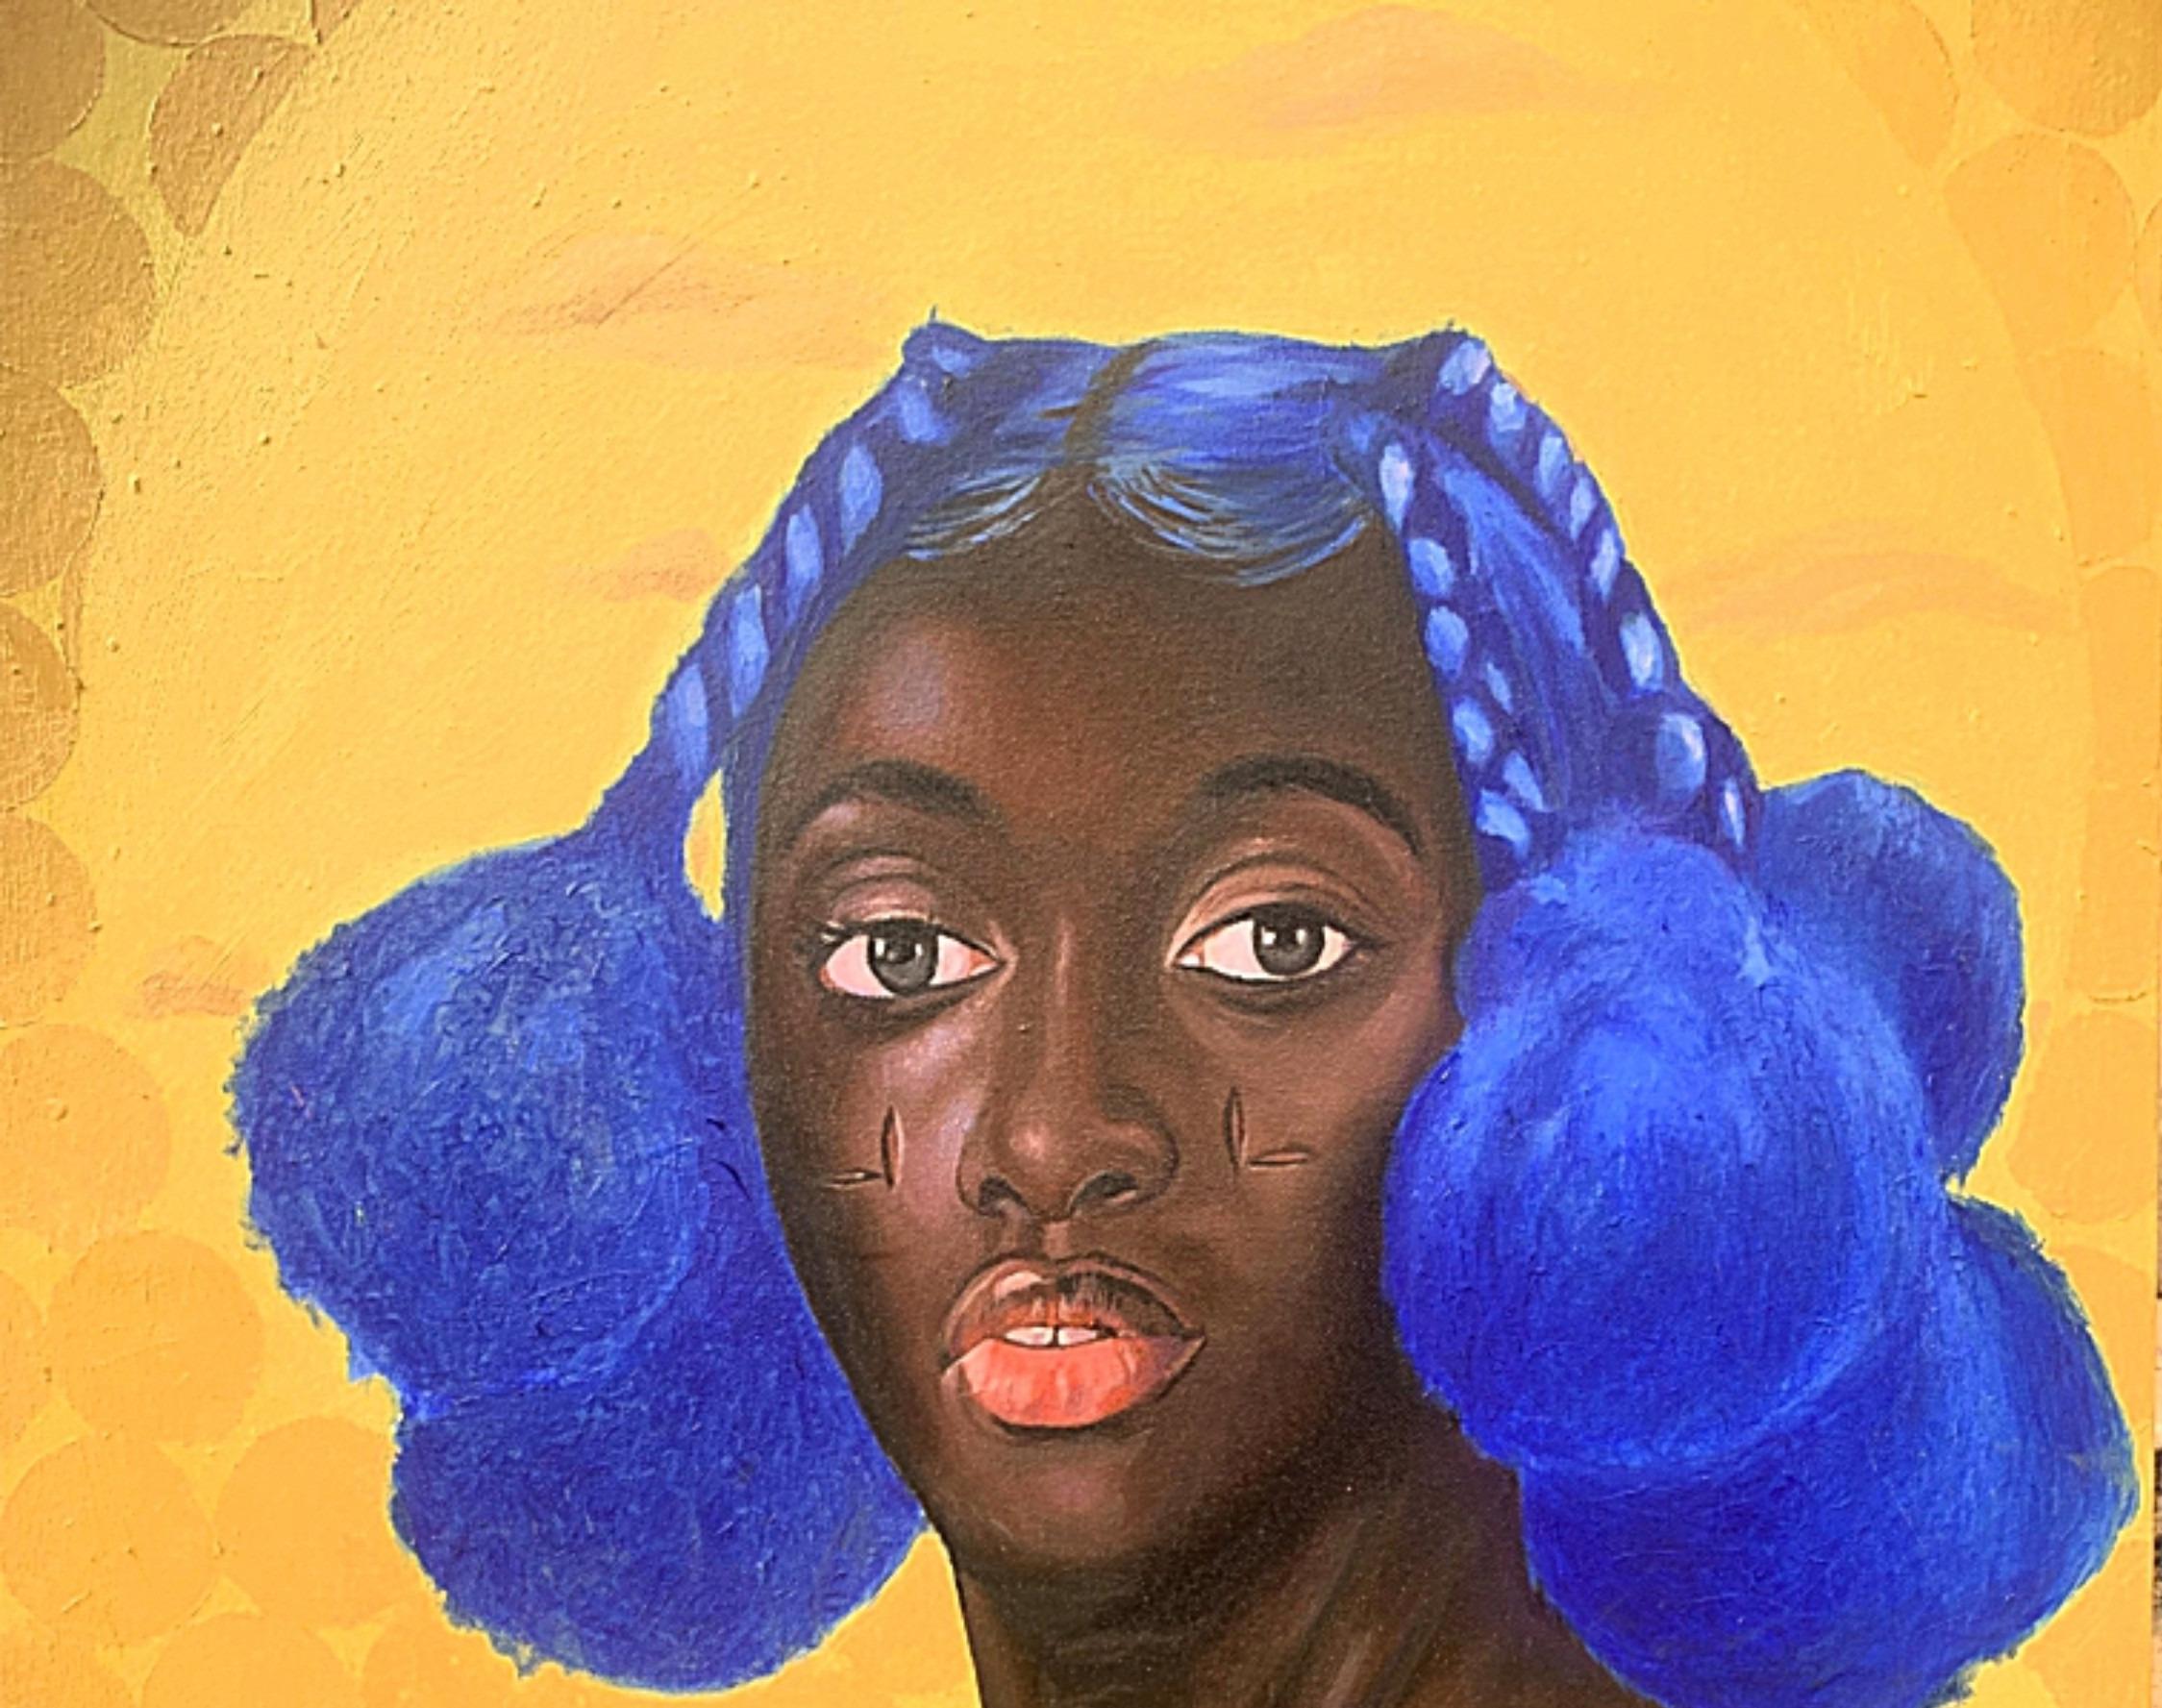 Be Bold - Painting by Adewuyi Theophilus